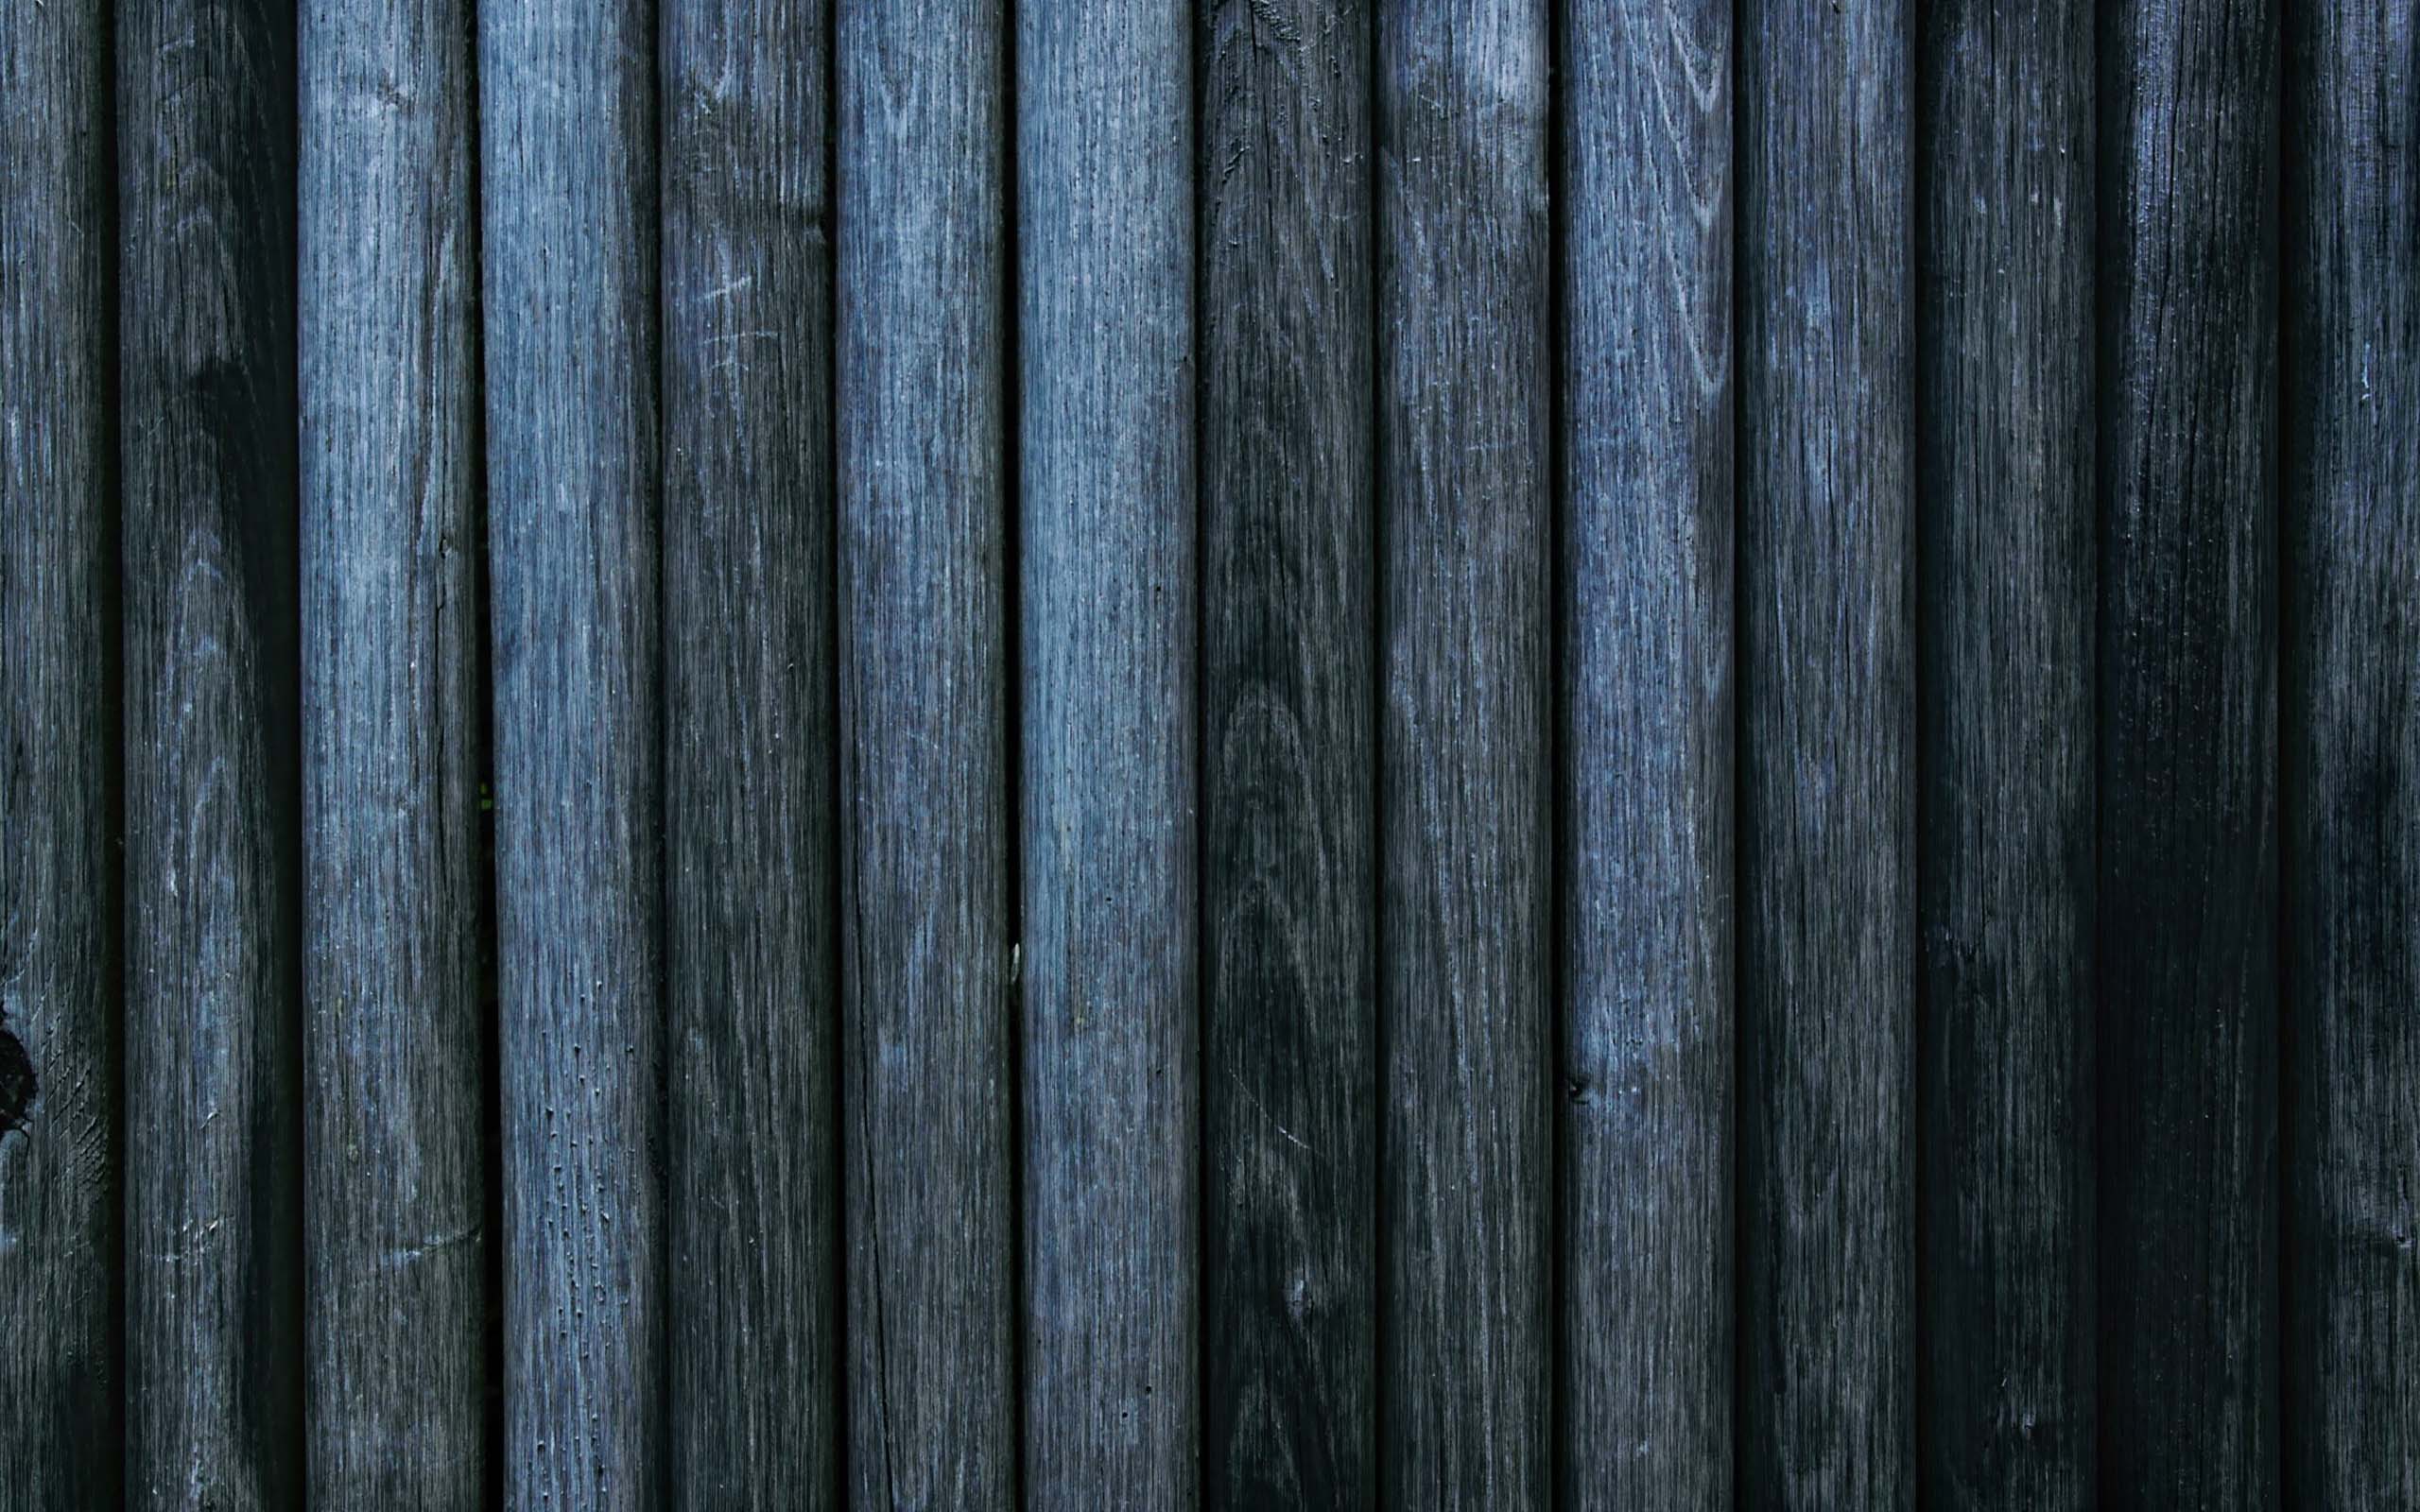 Wood Texture Hd - Backgrounds